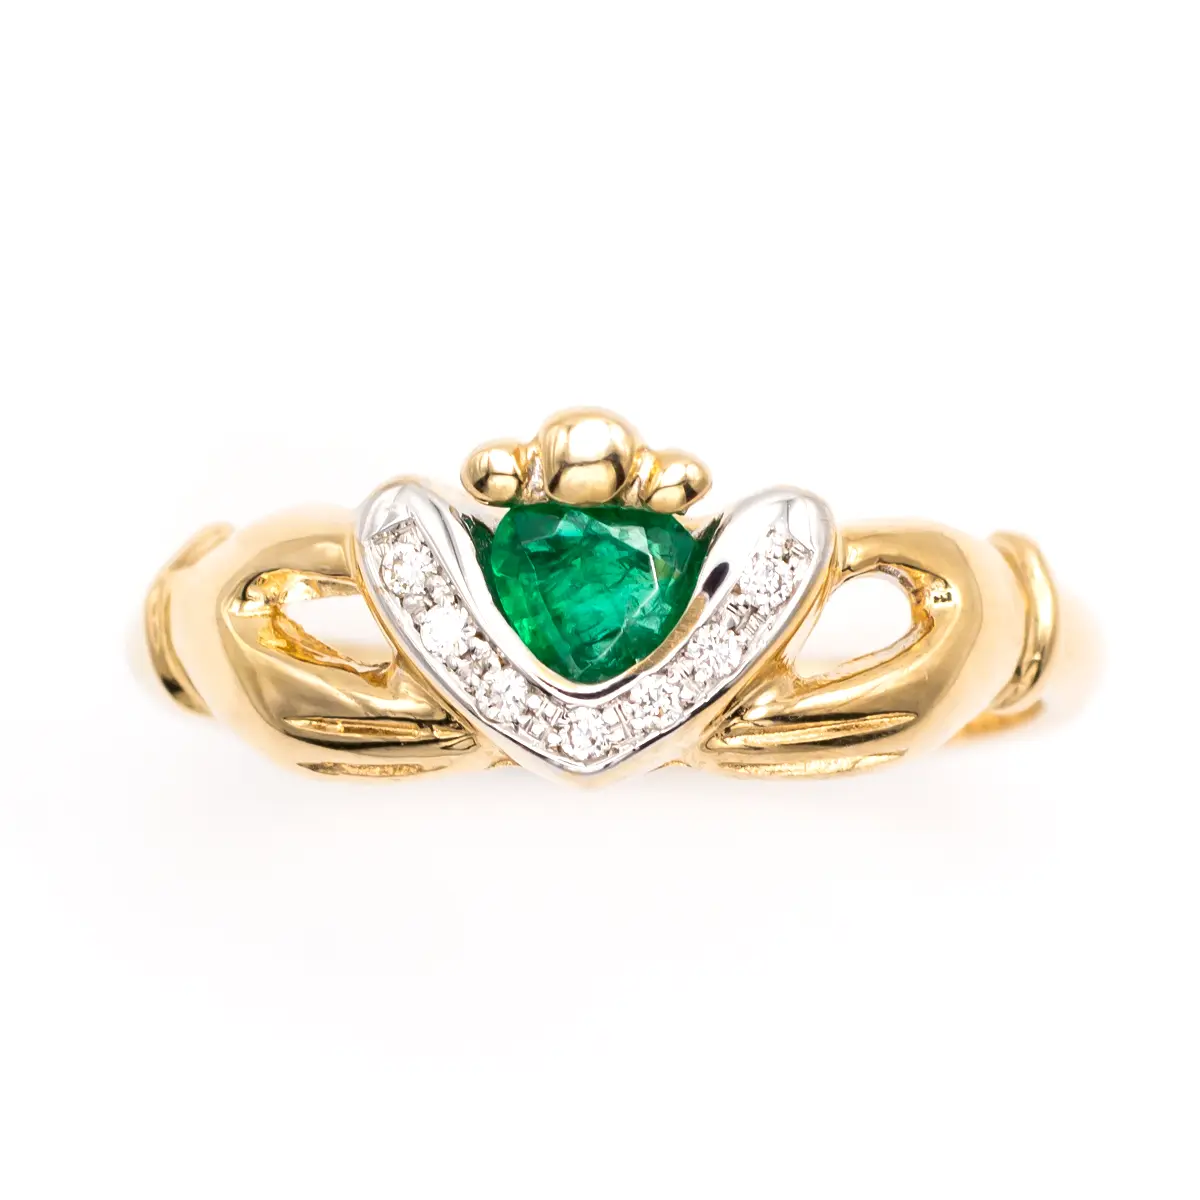 Ladies 14k Gold Claddagh Ring with Emerald and Diamonds